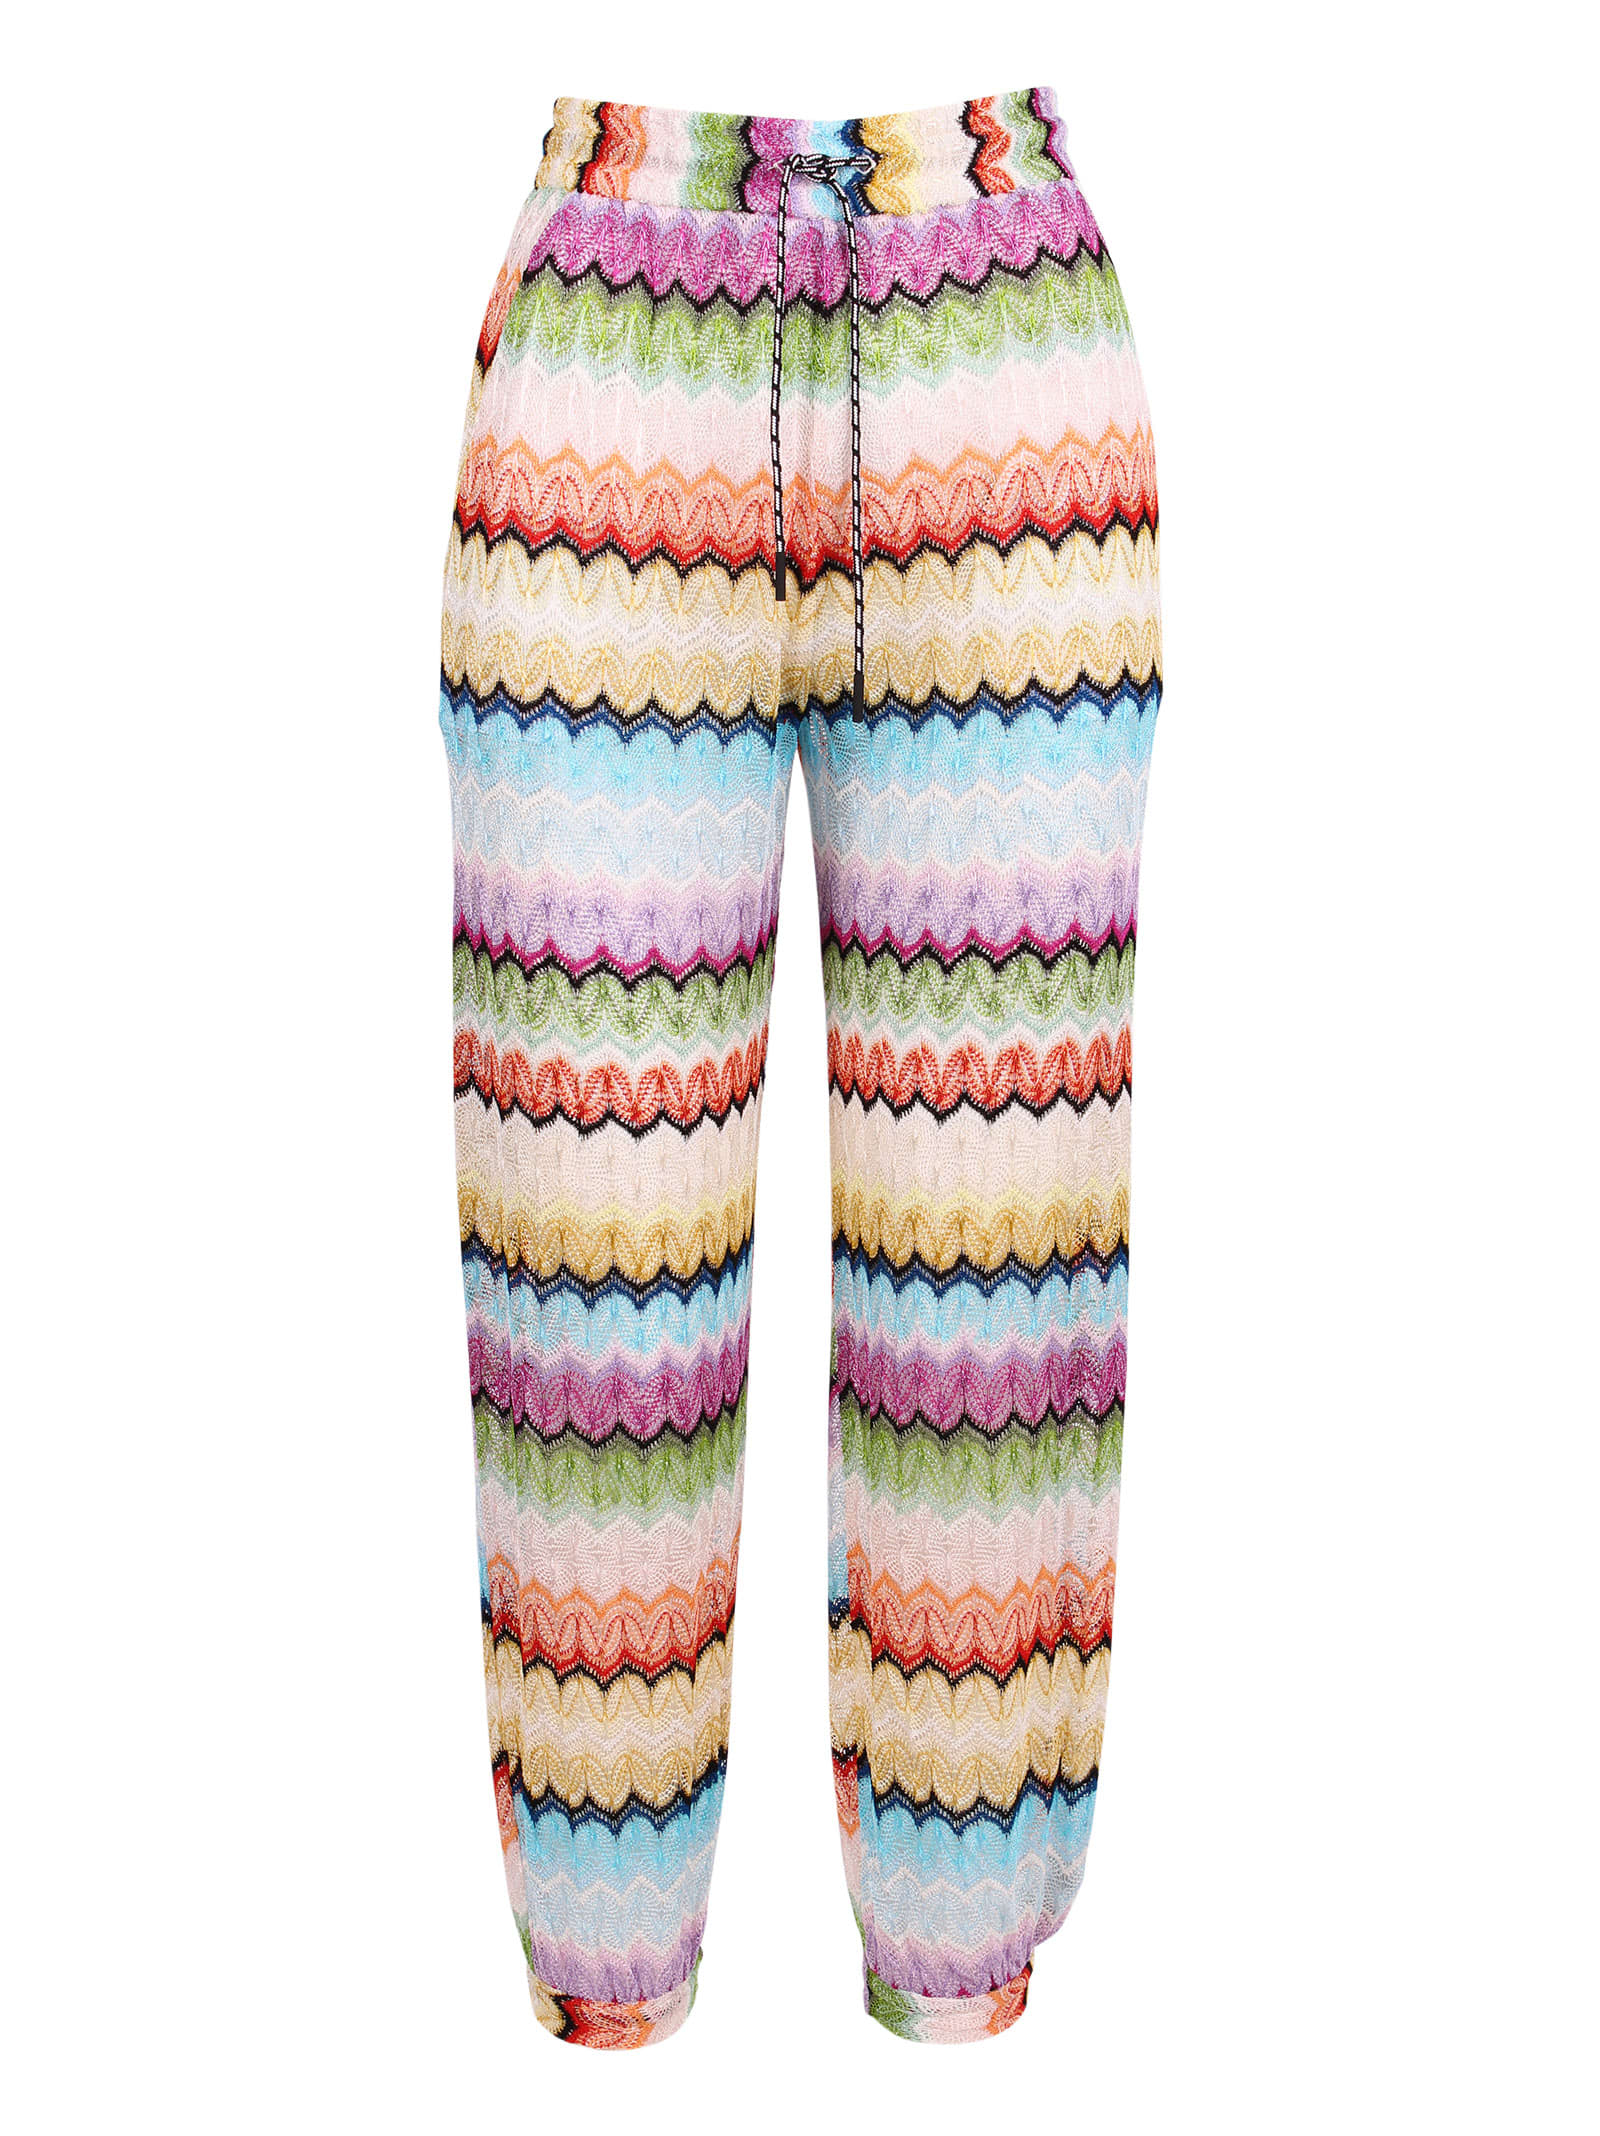 Missoni Fine Knitted Multicolor Zigzag Patterned Rayon Trousers